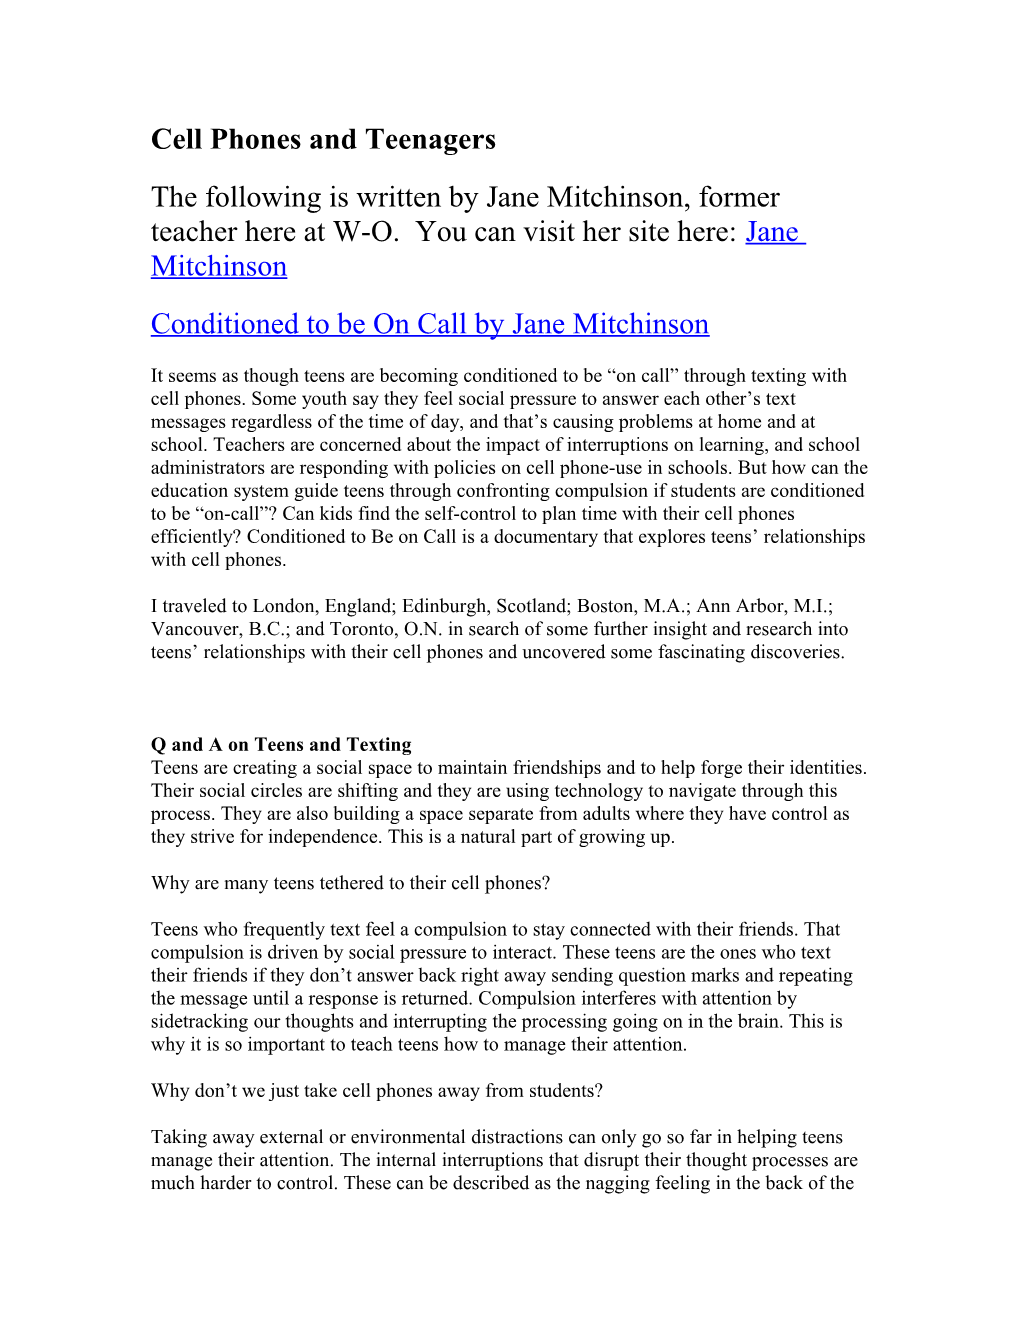 Conditioned to Be on Call by Jane Mitchinson